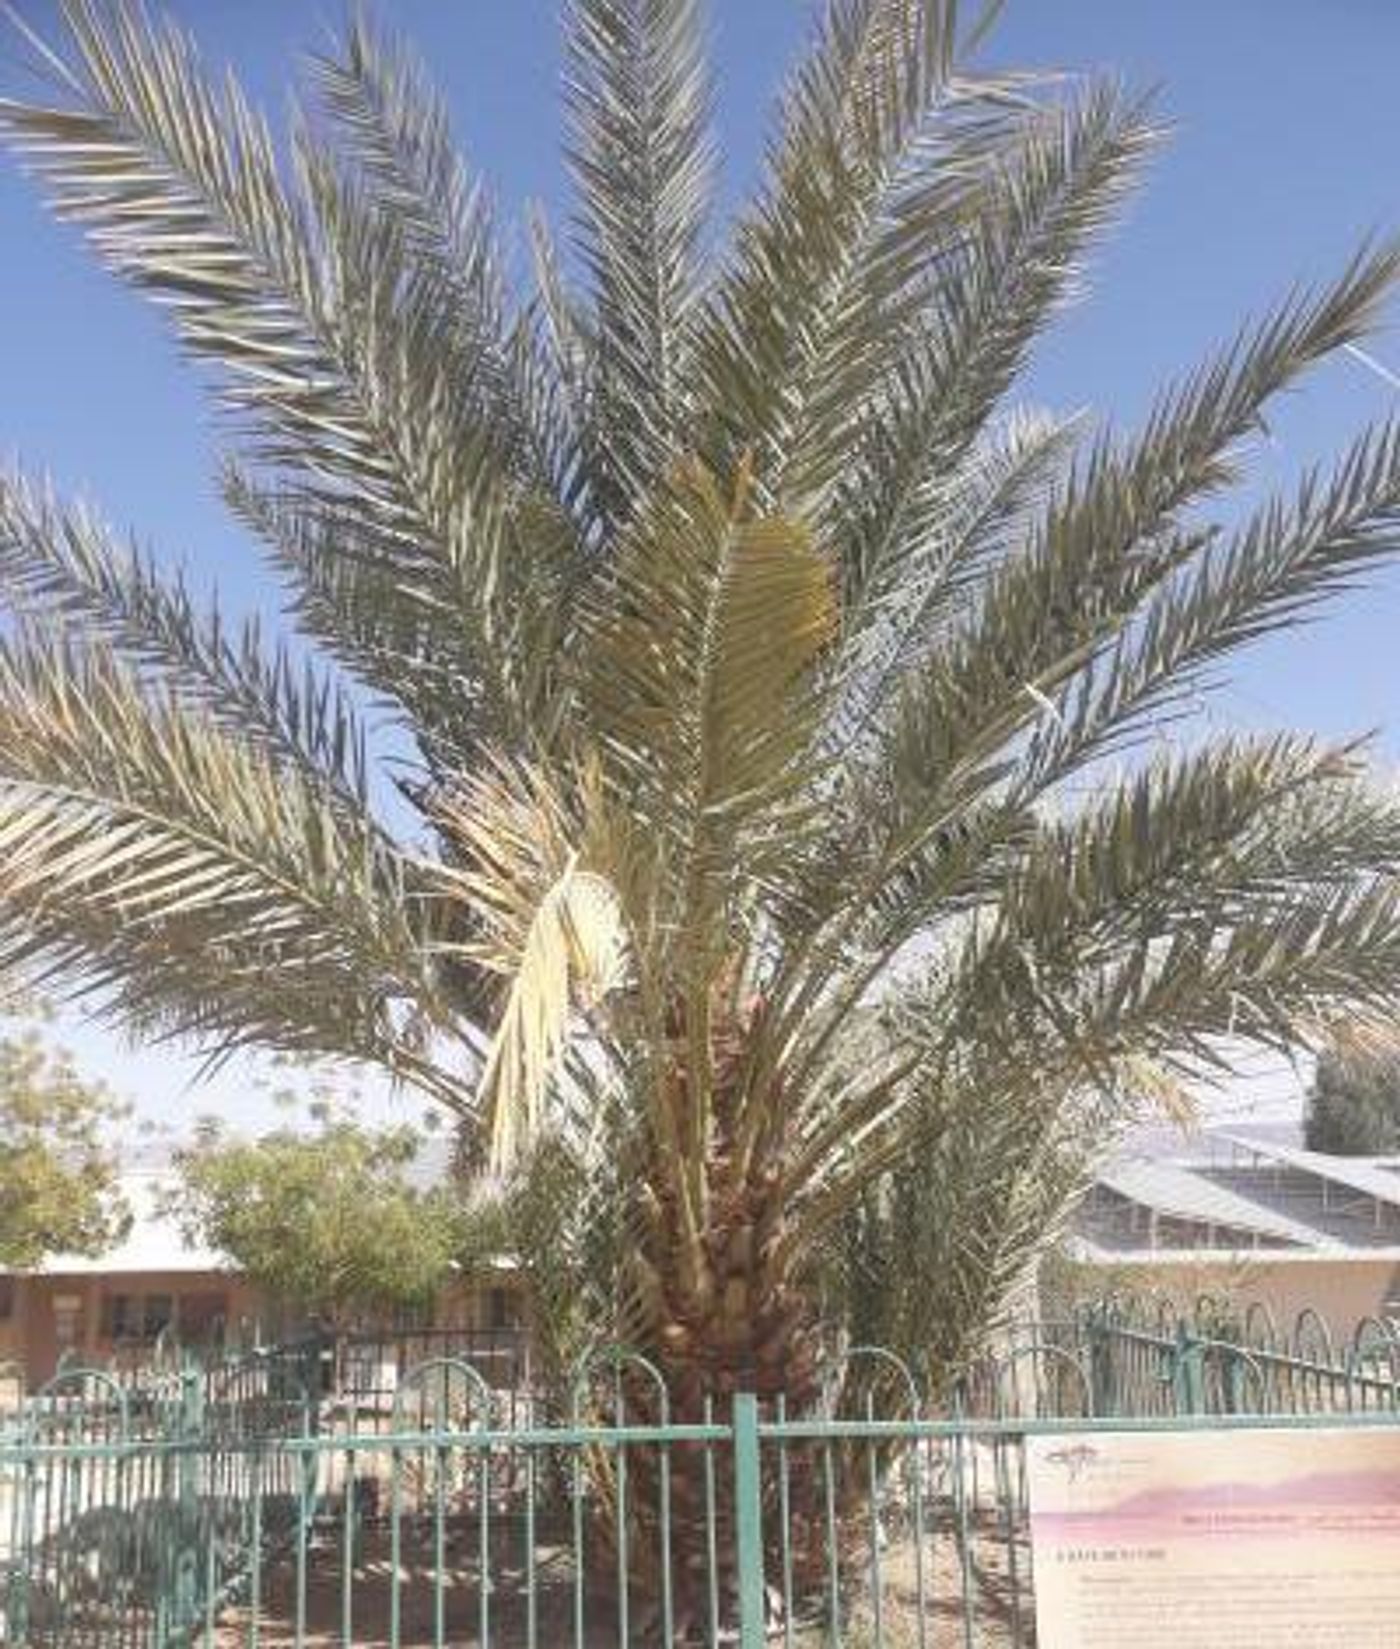 One of the date palms that was germinated from a 2,200 year old seed, now growing in Israel. / Credit: Sarah Sallon